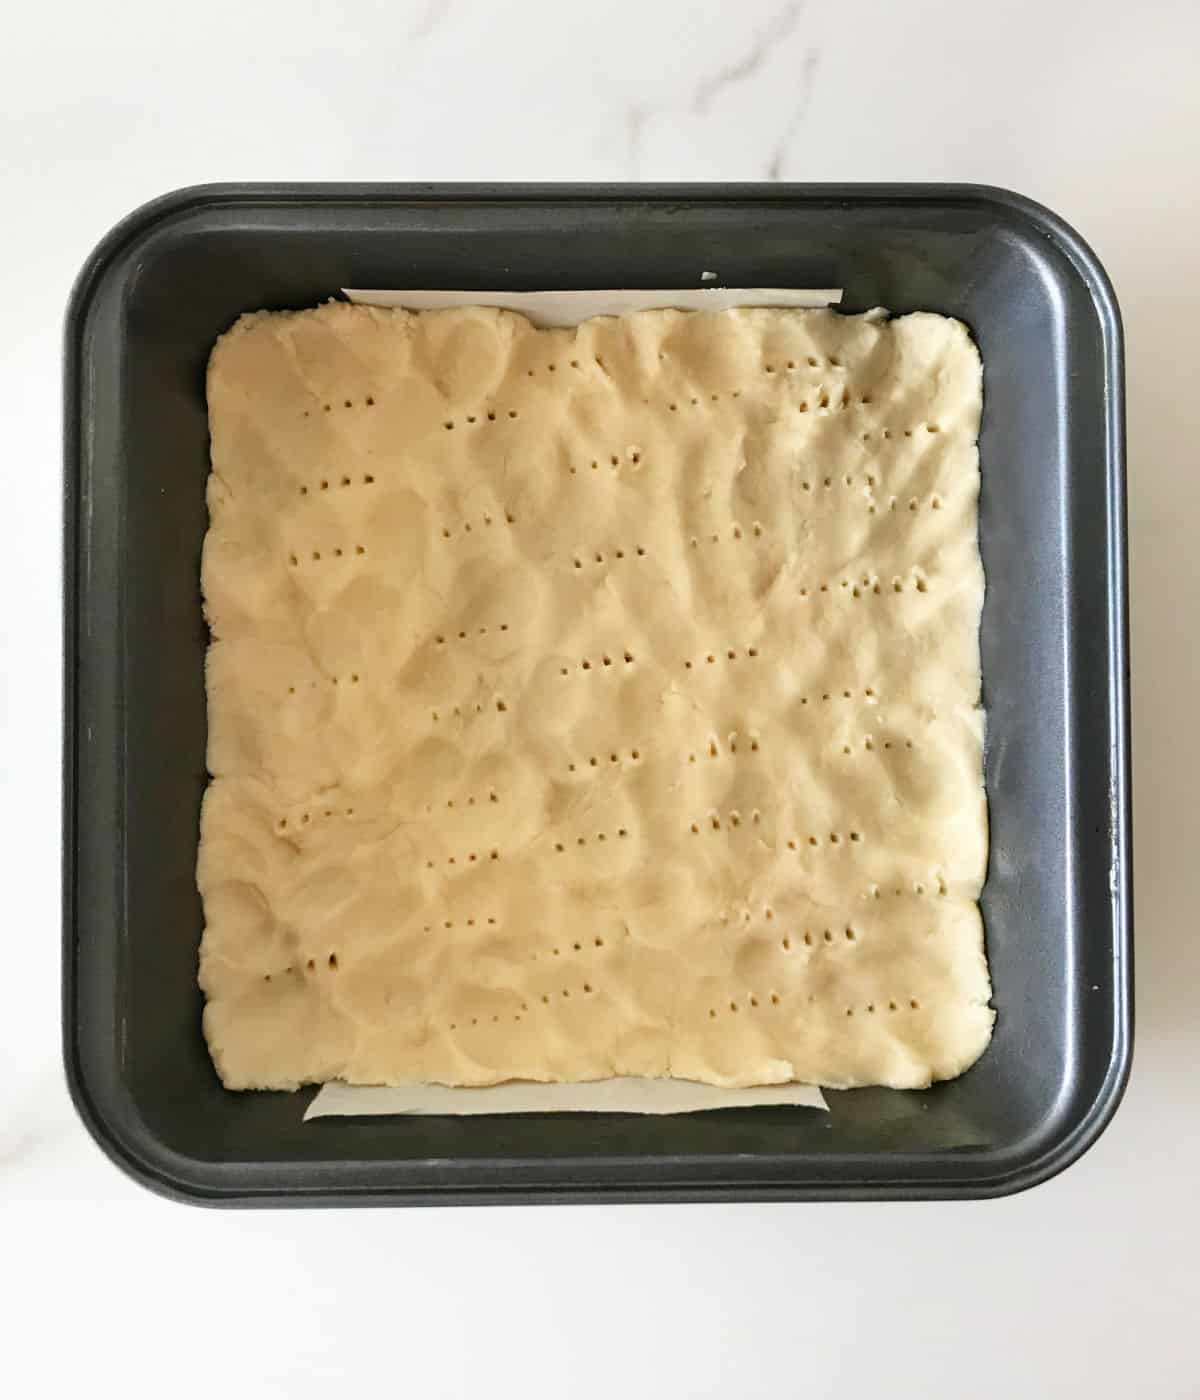 Unbaked shortbread crust pricked in a square metal baking pan on a white marble surface.